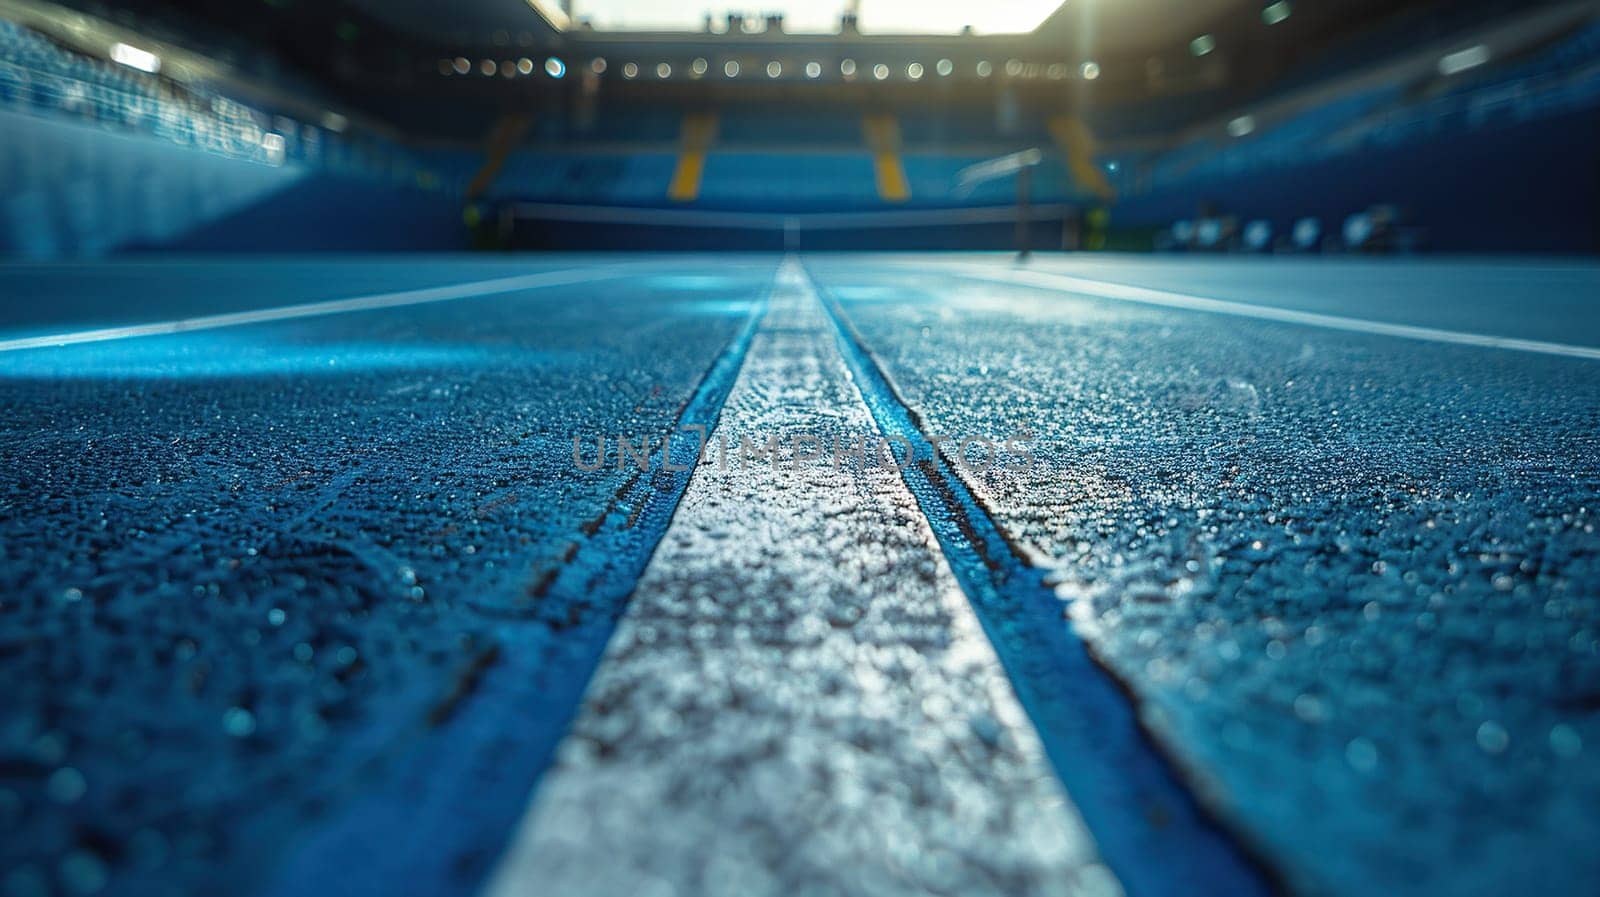 Close-up of a tennis court with blue turf. Ground level shot. Generated by artificial intelligence by Vovmar